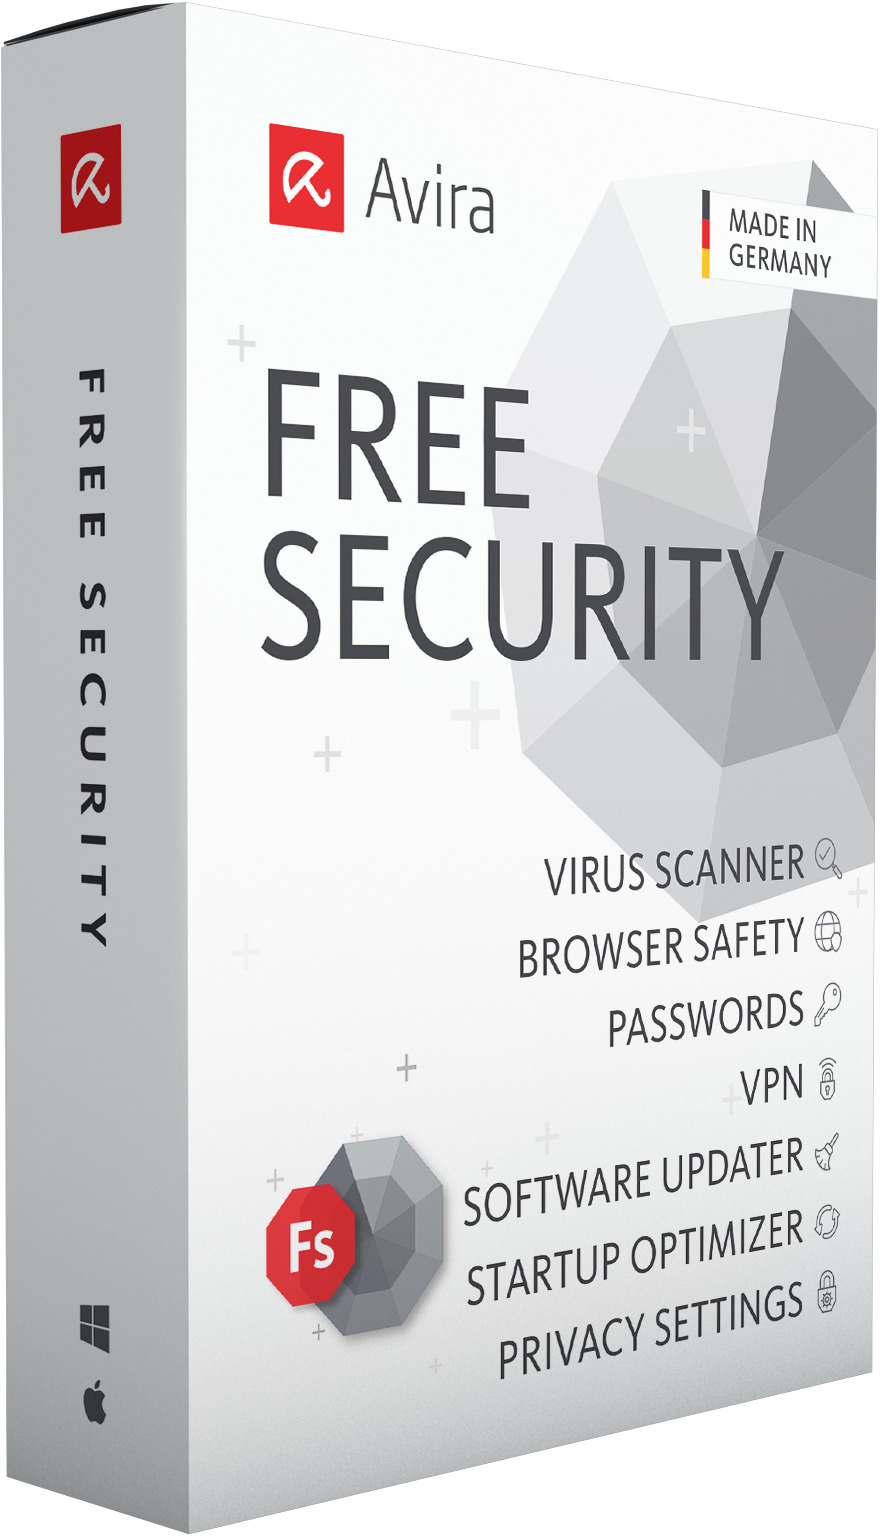 All-in-One: Avira Free Security